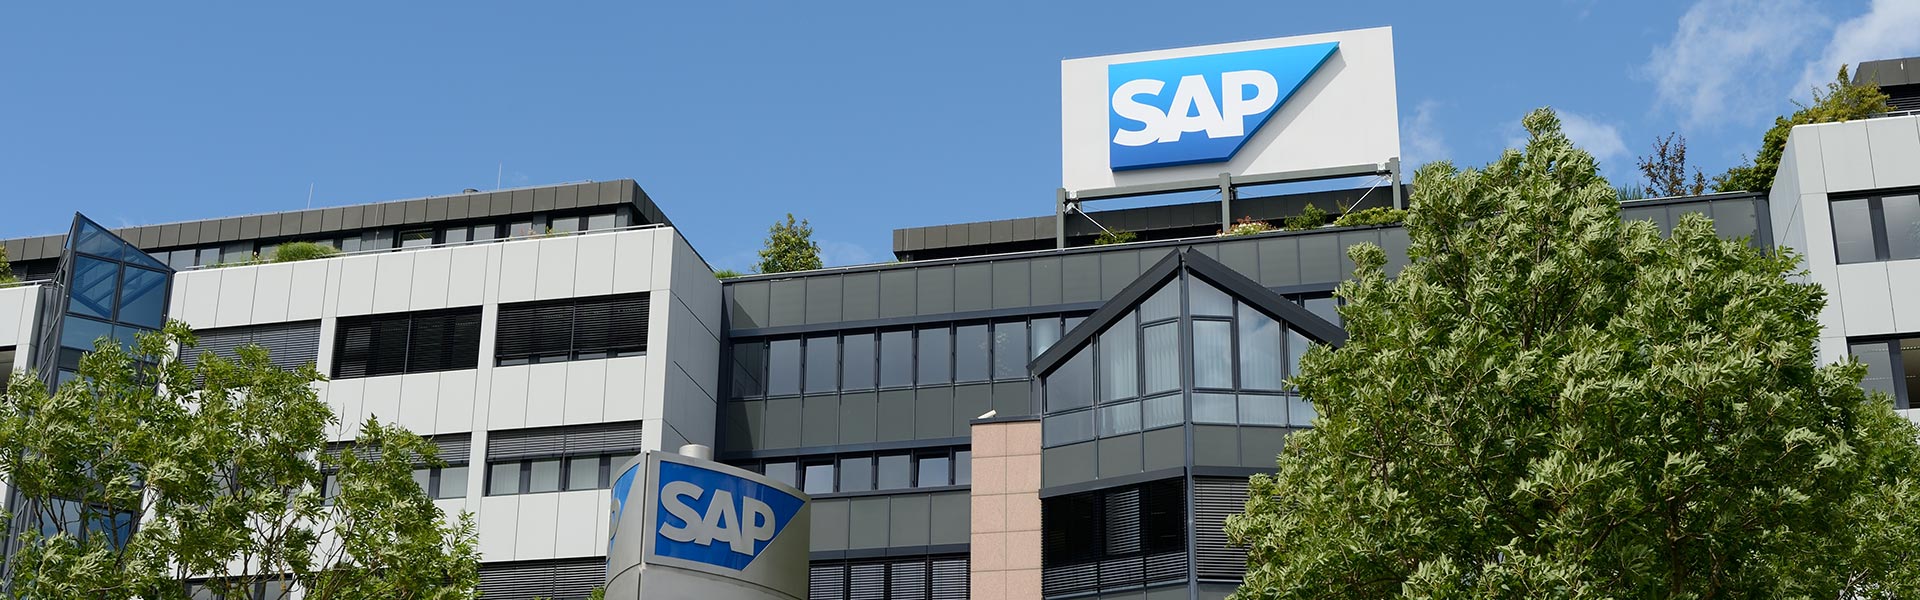 Taking the Long View, SAP Injects Innovation into SME Portfolio